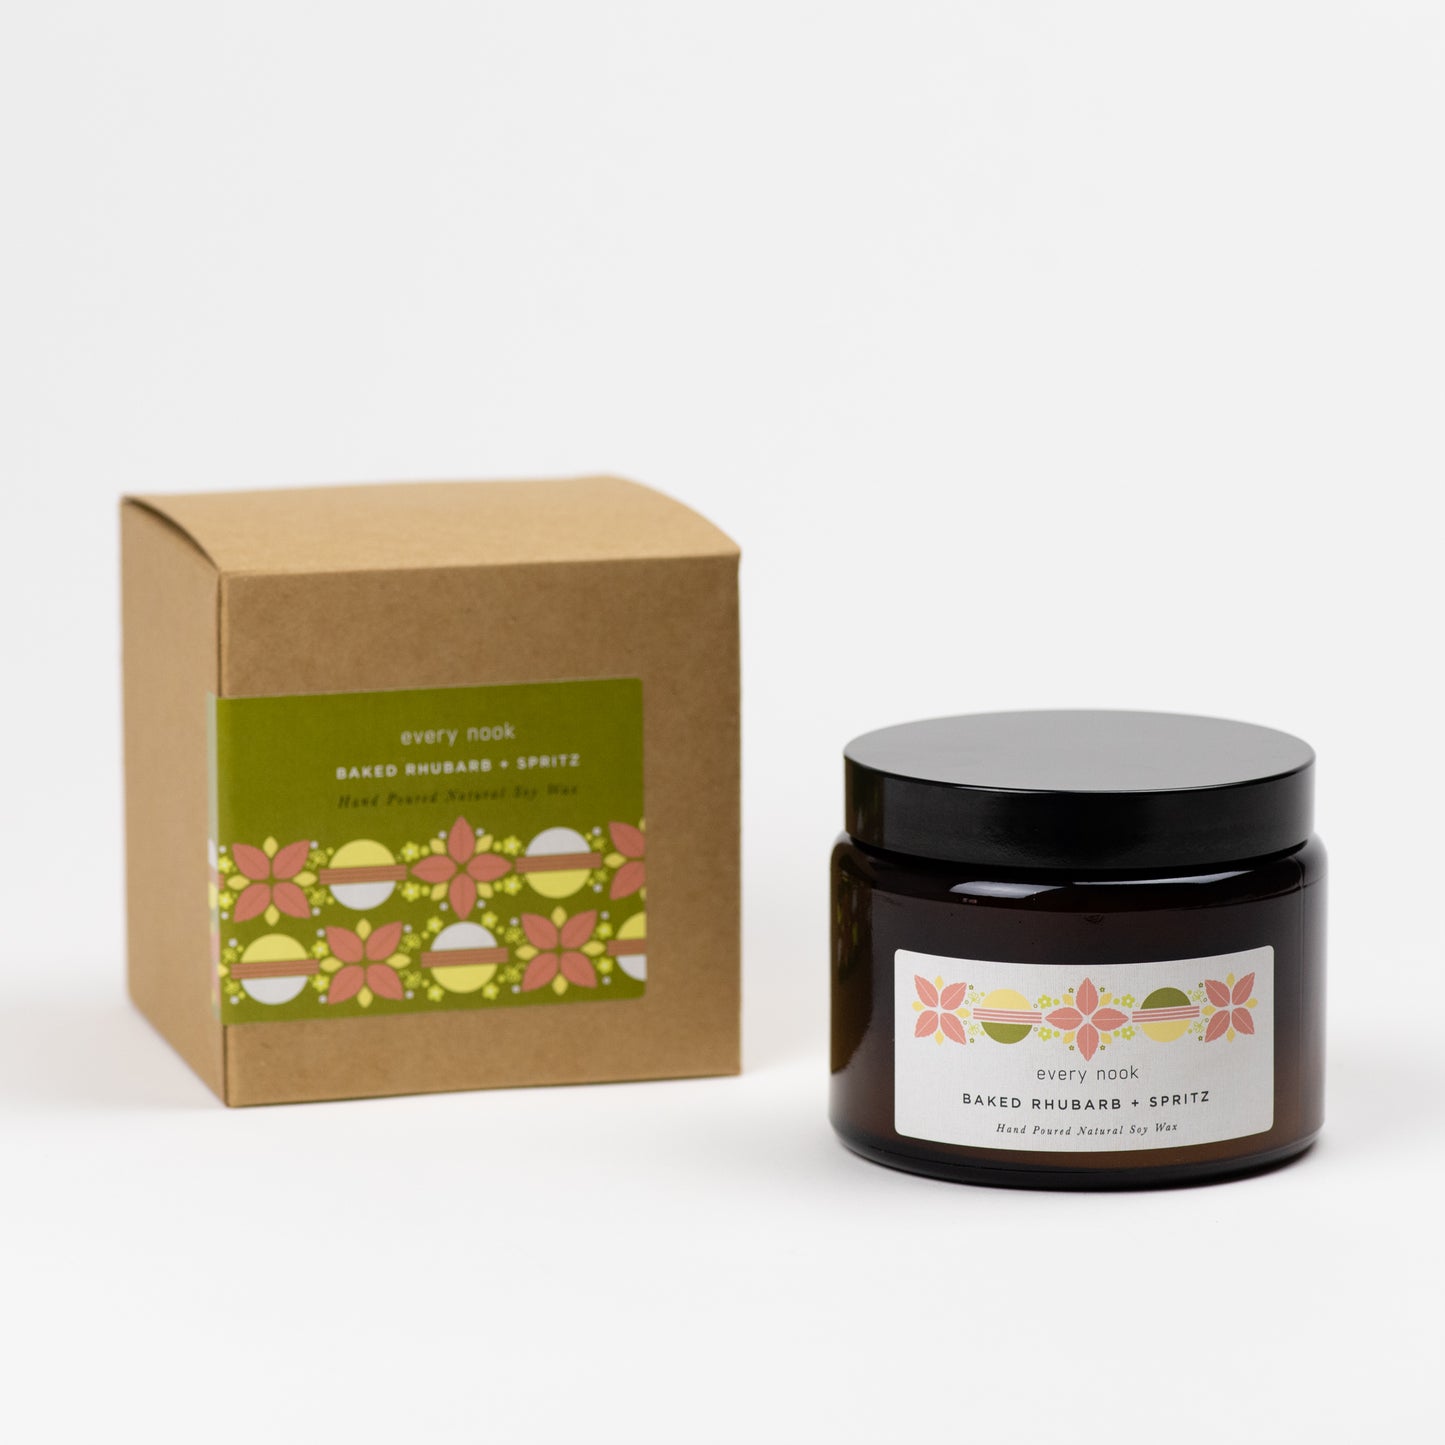 Baked Rhubarb + Spritz double wick scented candle